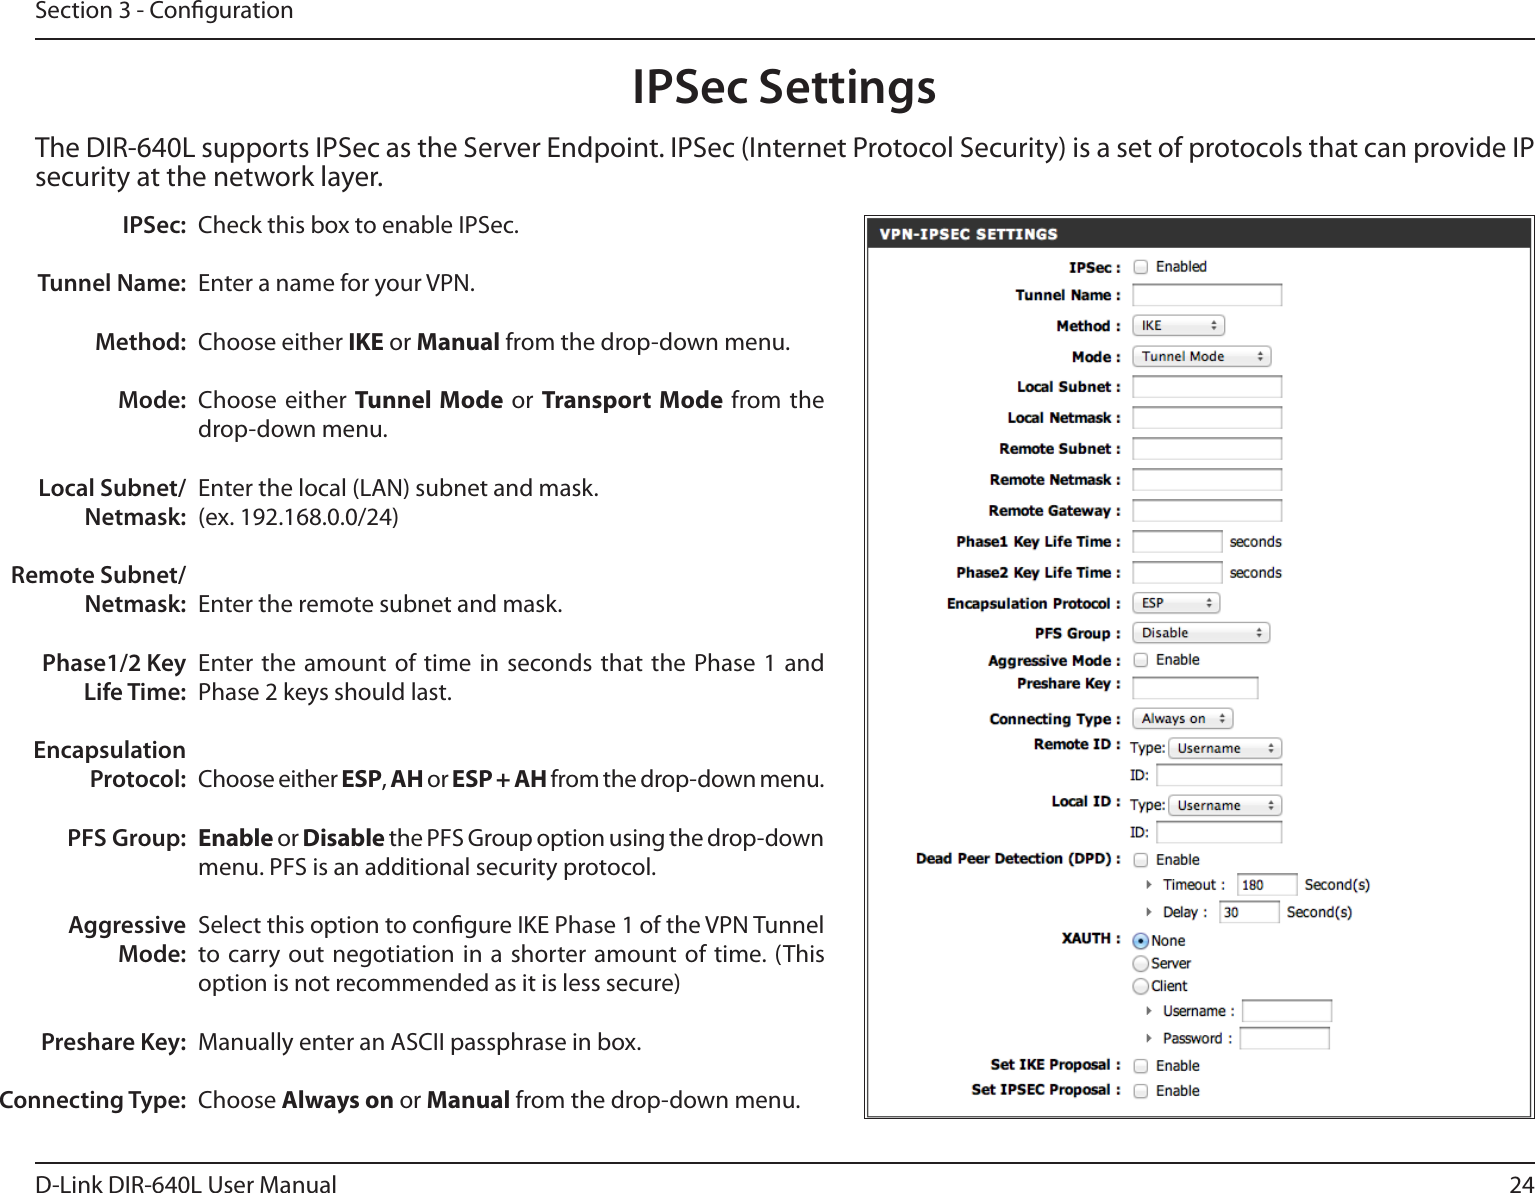 24D-Link DIR-640L User ManualSection 3 - CongurationCheck this box to enable IPSec.Enter a name for your VPN.Choose either IKE or Manual from the drop-down menu.Choose either  Tunnel Mode or Transport Mode  from  the drop-down menu.Enter the local (LAN) subnet and mask.(ex. 192.168.0.0/24)Enter the remote subnet and mask.Enter the  amount  of  time  in seconds that the Phase  1  and Phase 2 keys should last.Choose either ESP, AH or ESP + AH from the drop-down menu.Enable or Disable the PFS Group option using the drop-down menu. PFS is an additional security protocol.Select this option to congure IKE Phase 1 of the VPN Tunnel to carry out negotiation in a  shorter amount of time. (This option is not recommended as it is less secure)Manually enter an ASCII passphrase in box.Choose Always on or Manual from the drop-down menu.IPSec:Tunnel Name:Method:Mode:Local Subnet/Netmask:Remote Subnet/Netmask:Phase1/2 Key Life Time:Encapsulation Protocol:PFS Group:Aggressive Mode:Preshare Key:Connecting Type:IPSec SettingsThe DIR-640L supports IPSec as the Server Endpoint. IPSec (Internet Protocol Security) is a set of protocols that can provide IP security at the network layer.